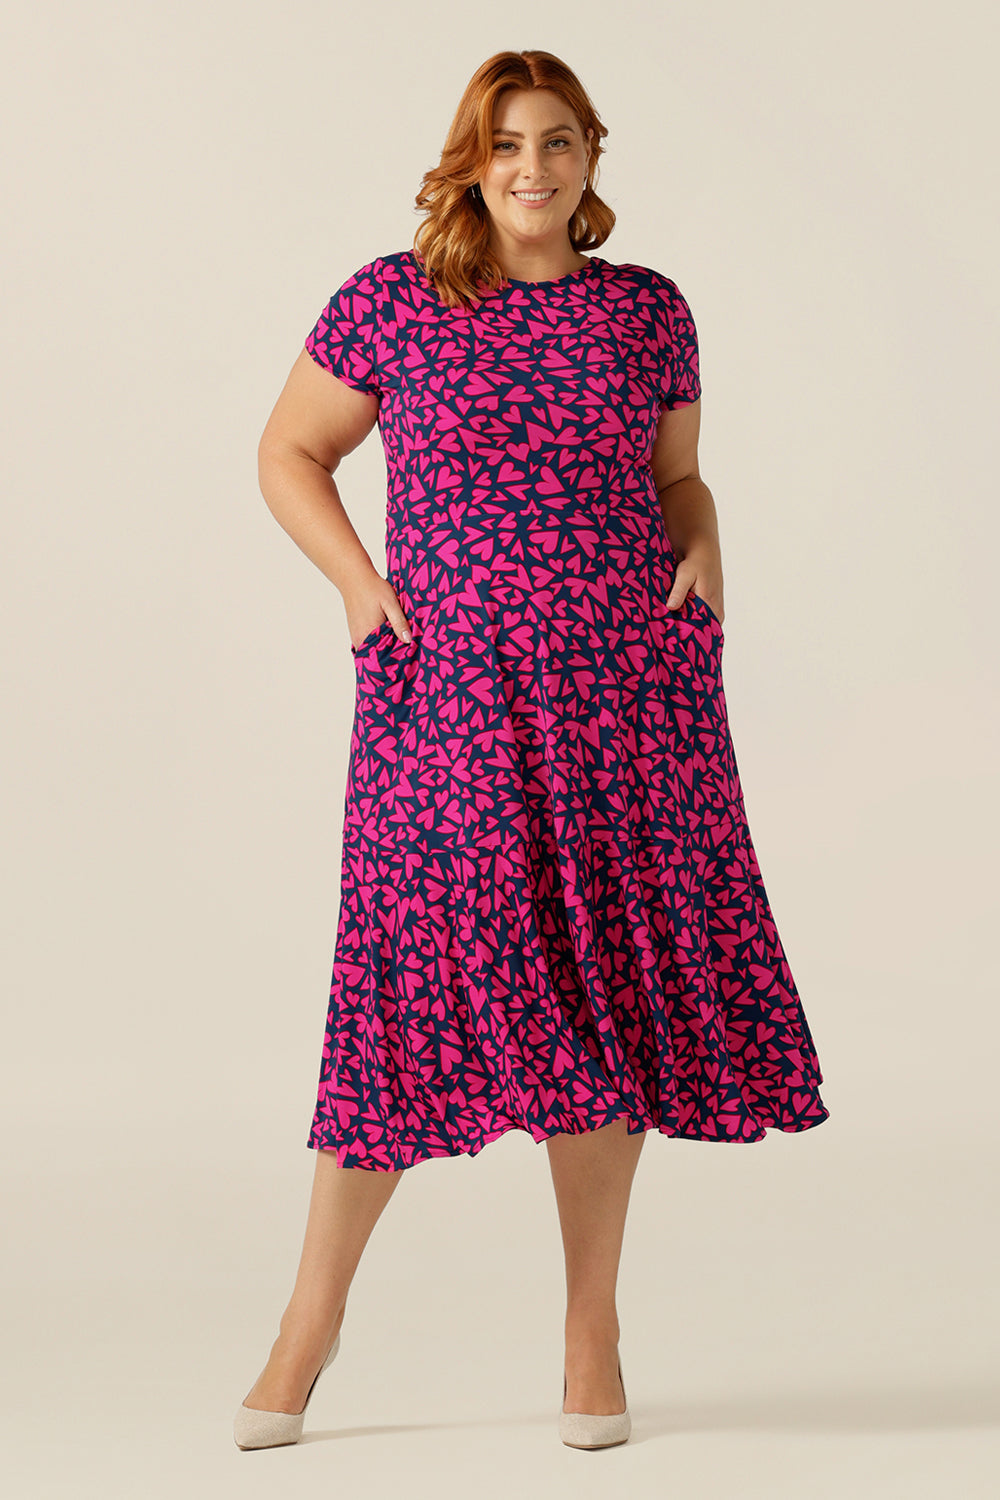 size 18 curvy woman wears a reversible jersey wrap dress. Worn with the crossover neckline to the front, this dress can be worn reversed with a boat neckline. This dress has short sleeves and a below-the-knee skirt with pockets. The dress is patterned with a pink heart print - perfect as a Valentines Day date-night dress or evening or occasionwear.